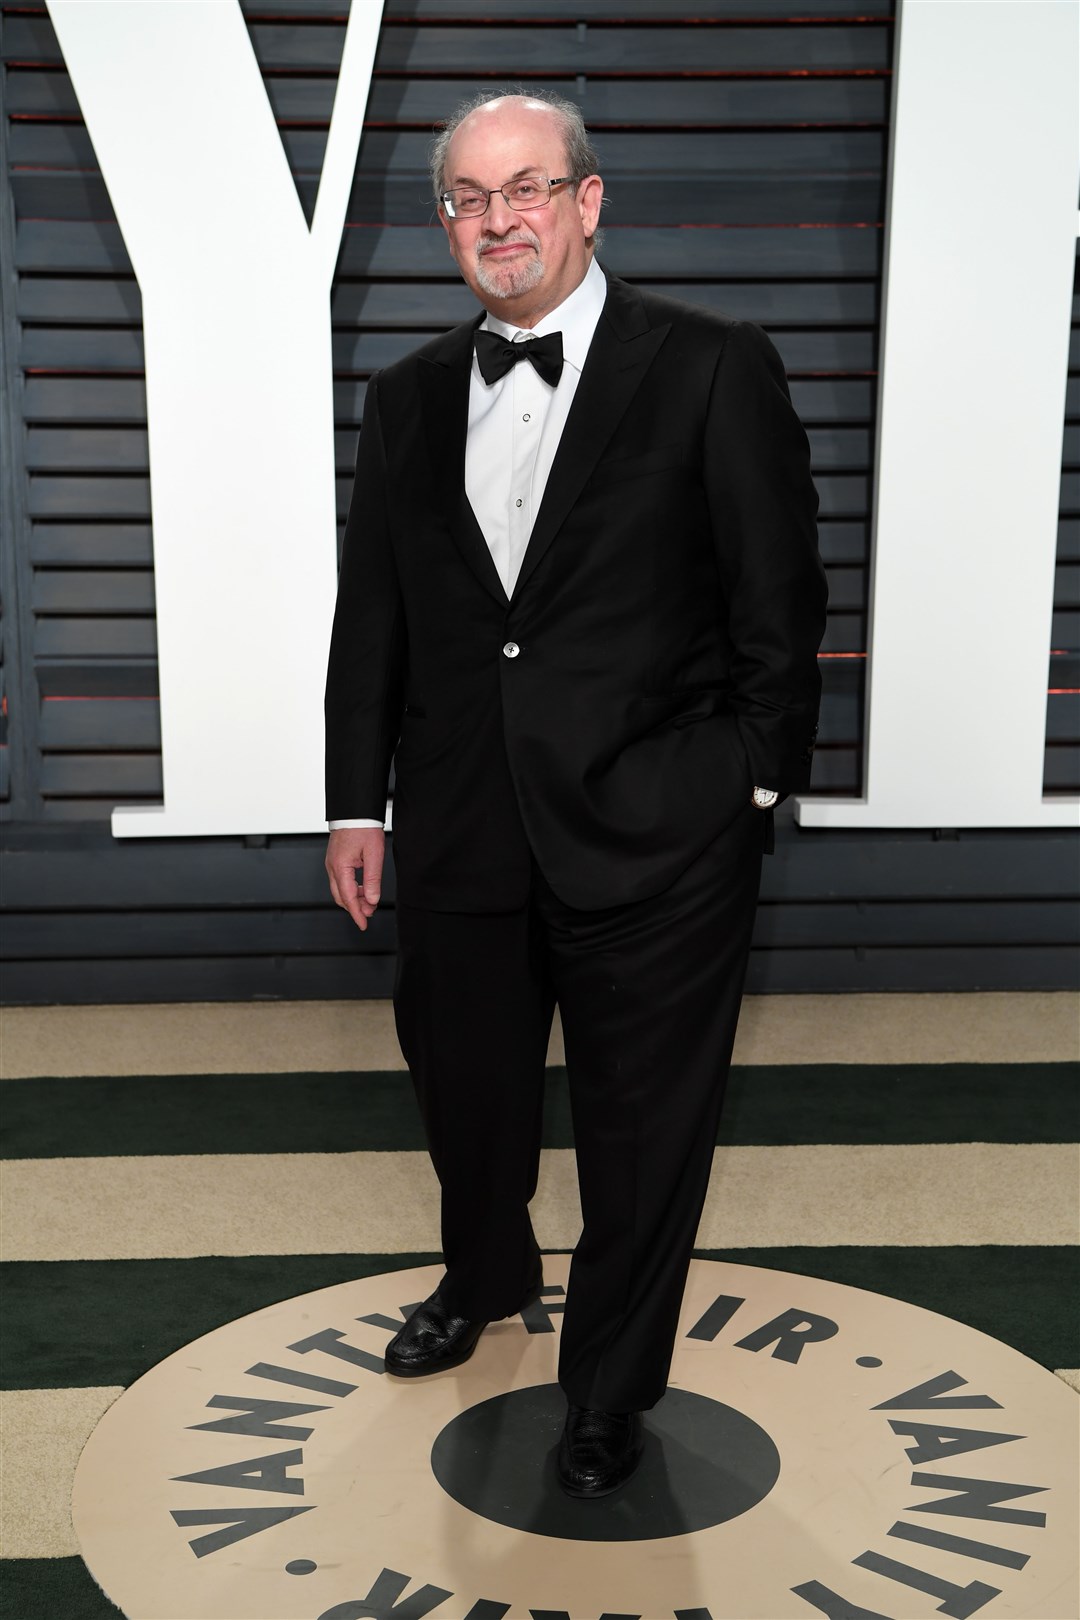 Salman Rushdie arriving at the Vanity Fair Oscar Party in Beverly Hills, Los Angeles, USA.